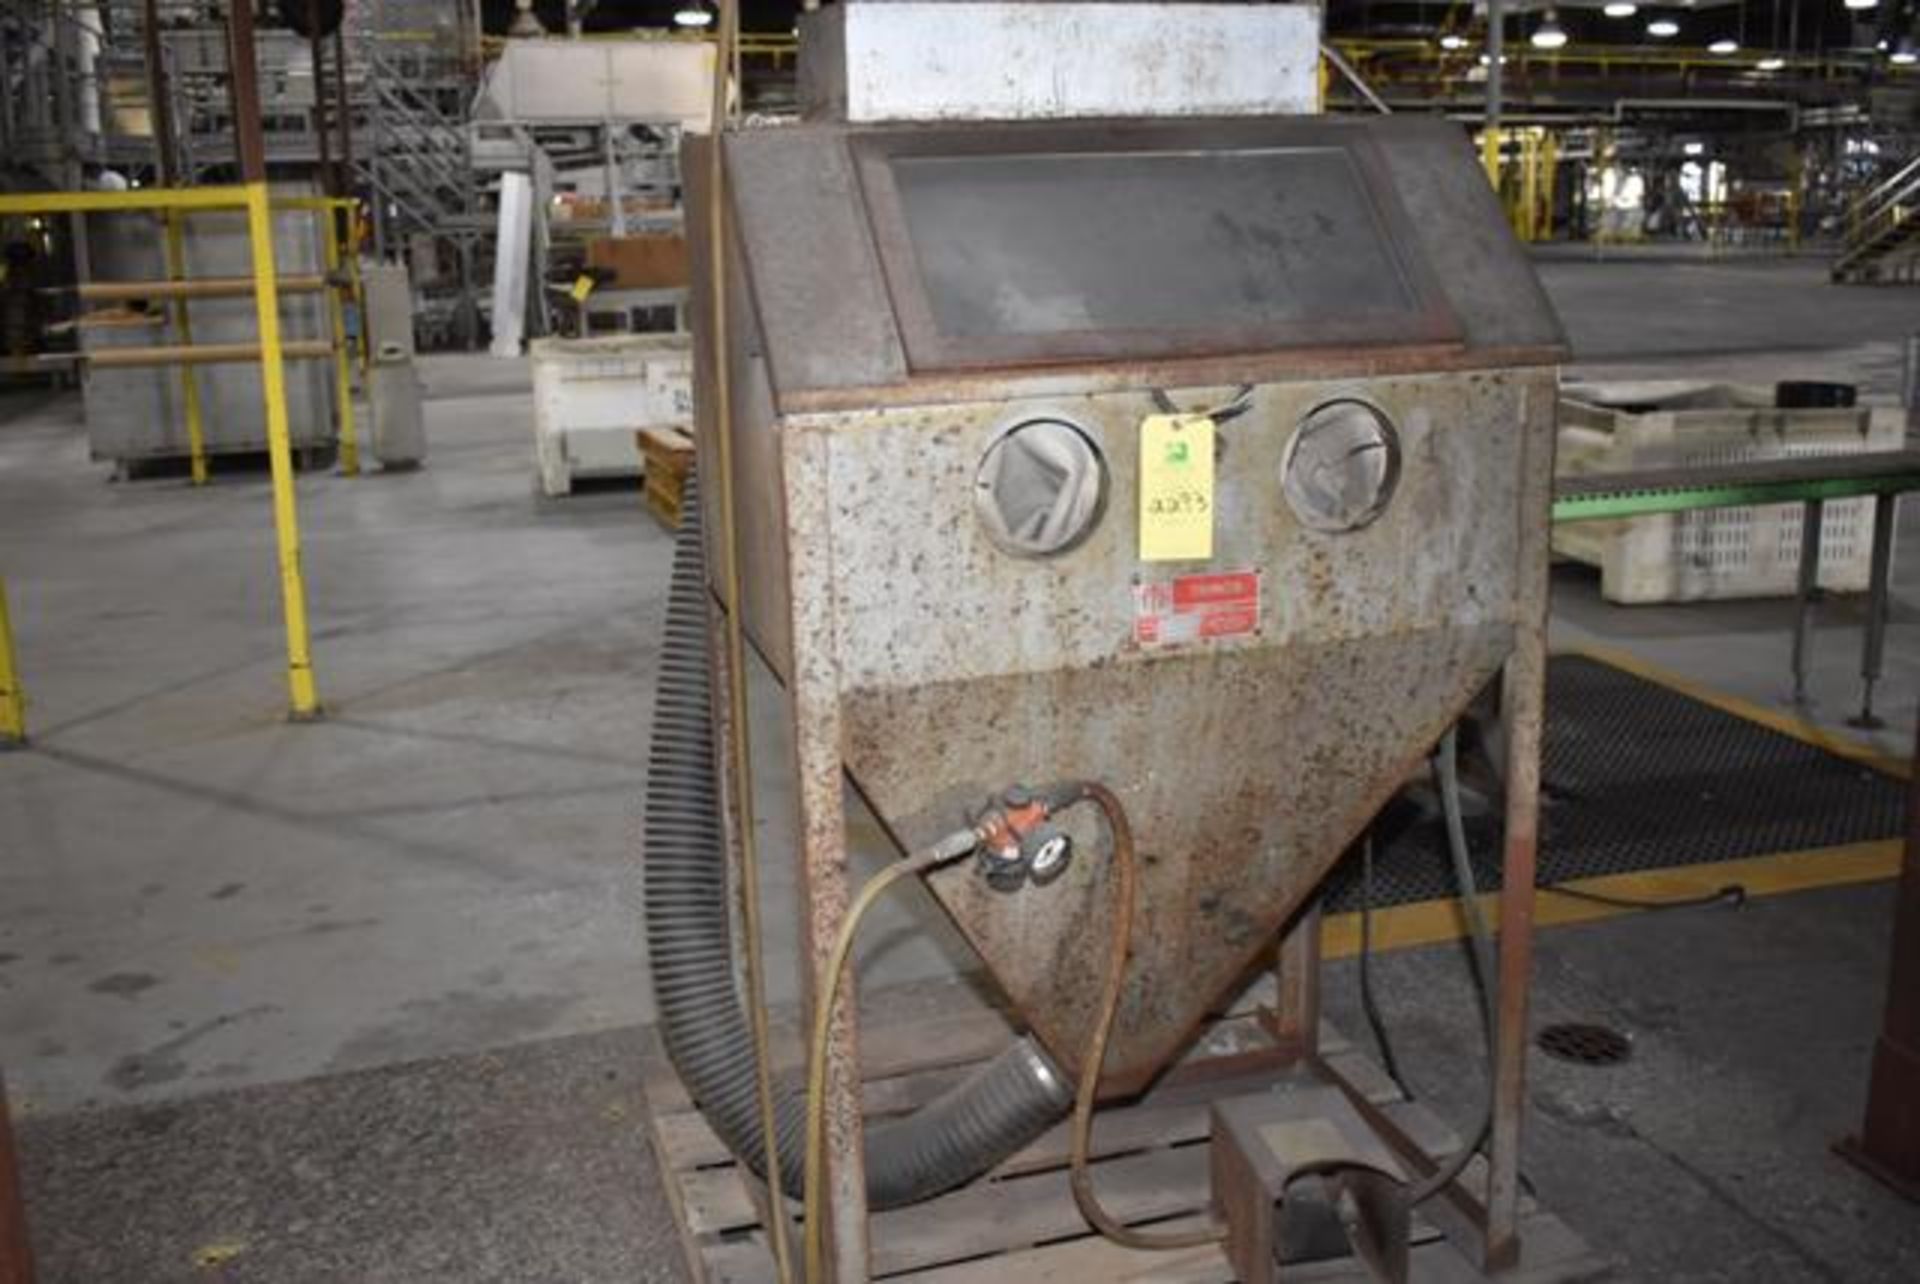 Trinco #36-300 Dry Blast Finishing Machine, SN 20291-5 Includes Dust Collection System